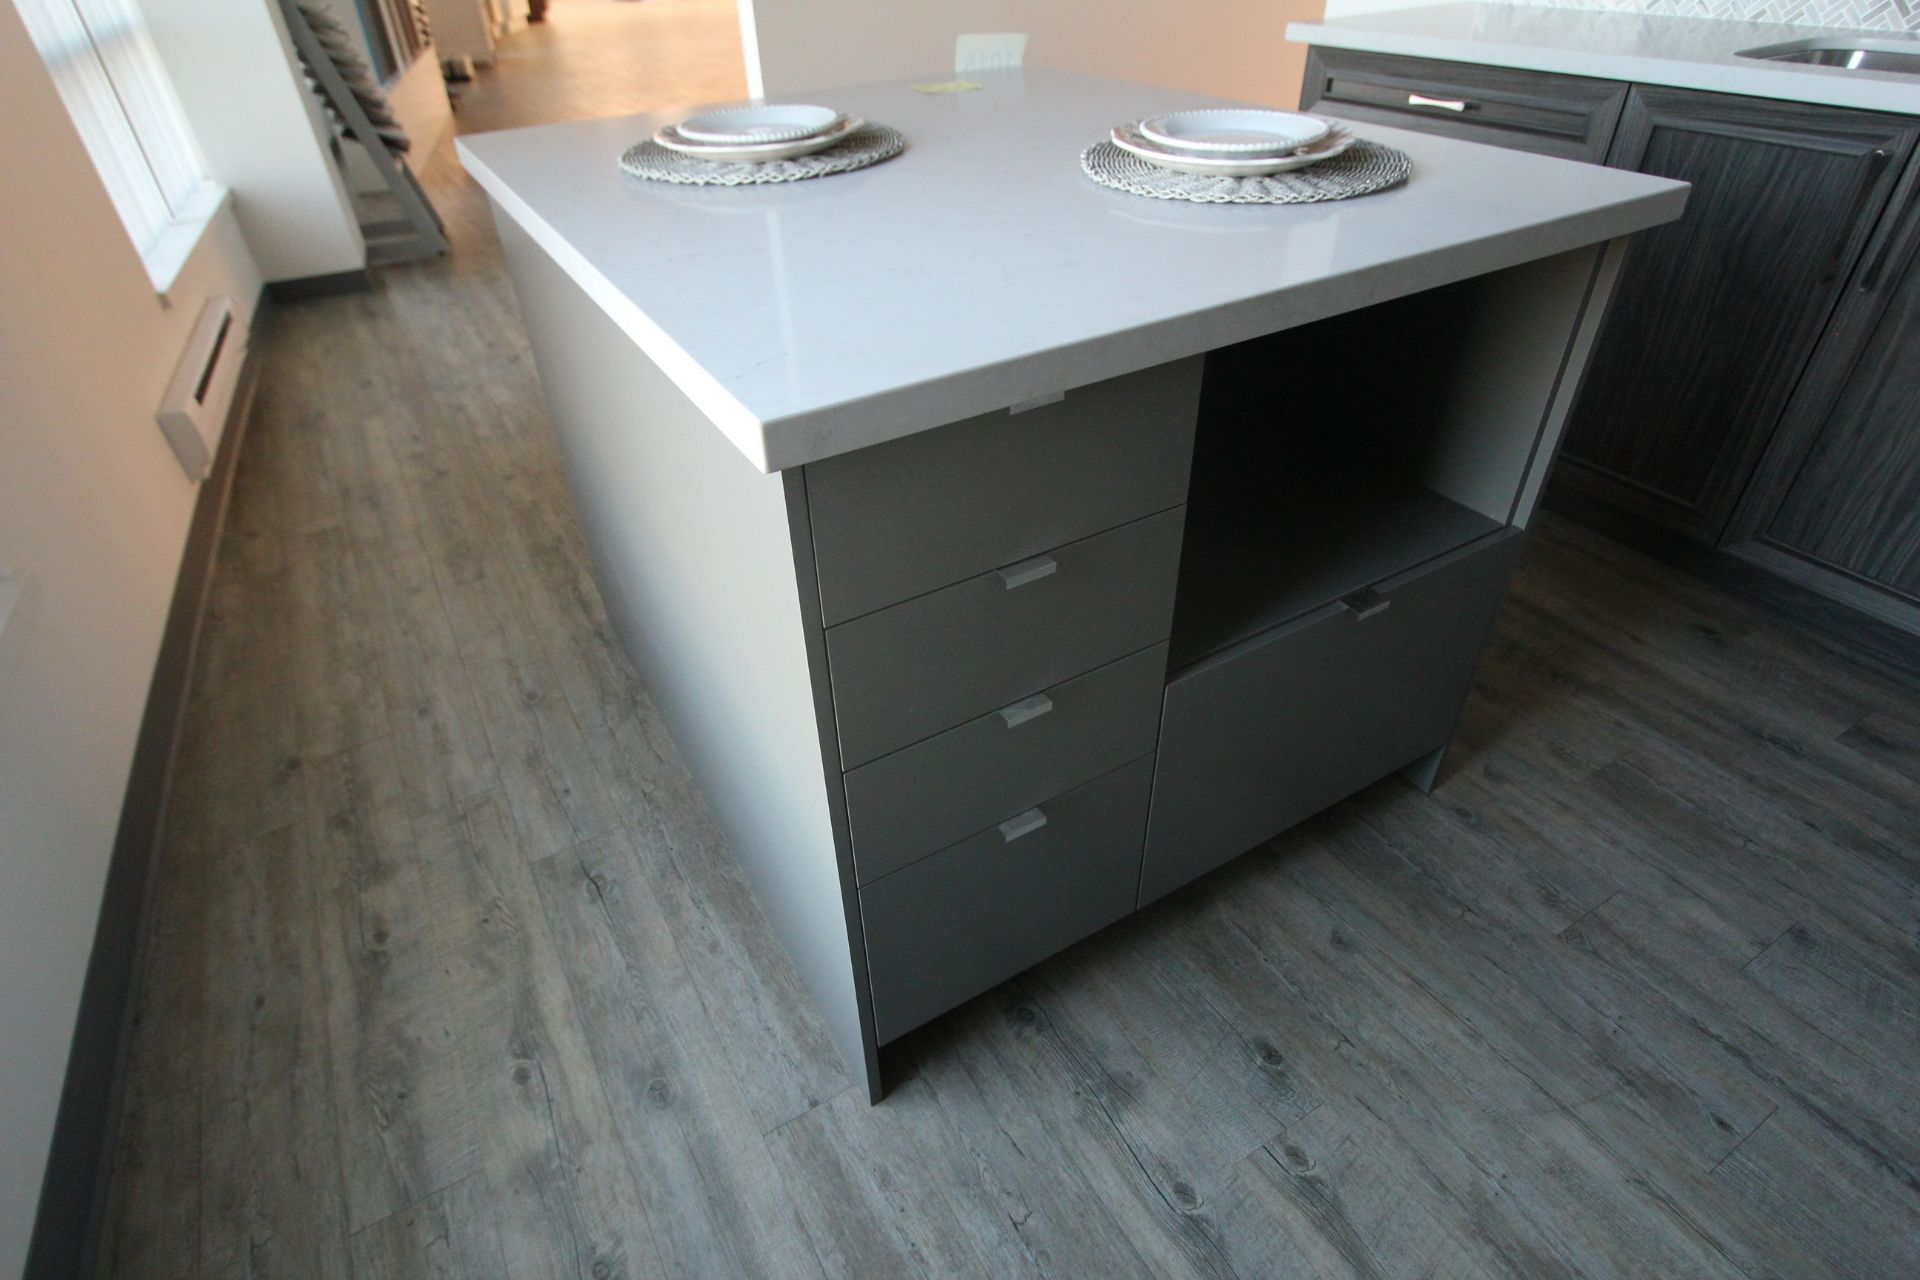 SHOWROOM DISPLAY KITCHEN, 125"L X 122"W L-SHAPE, 51" X 42" ISLAND W/ CABINETRY, COUNTERTOP, - Image 5 of 5